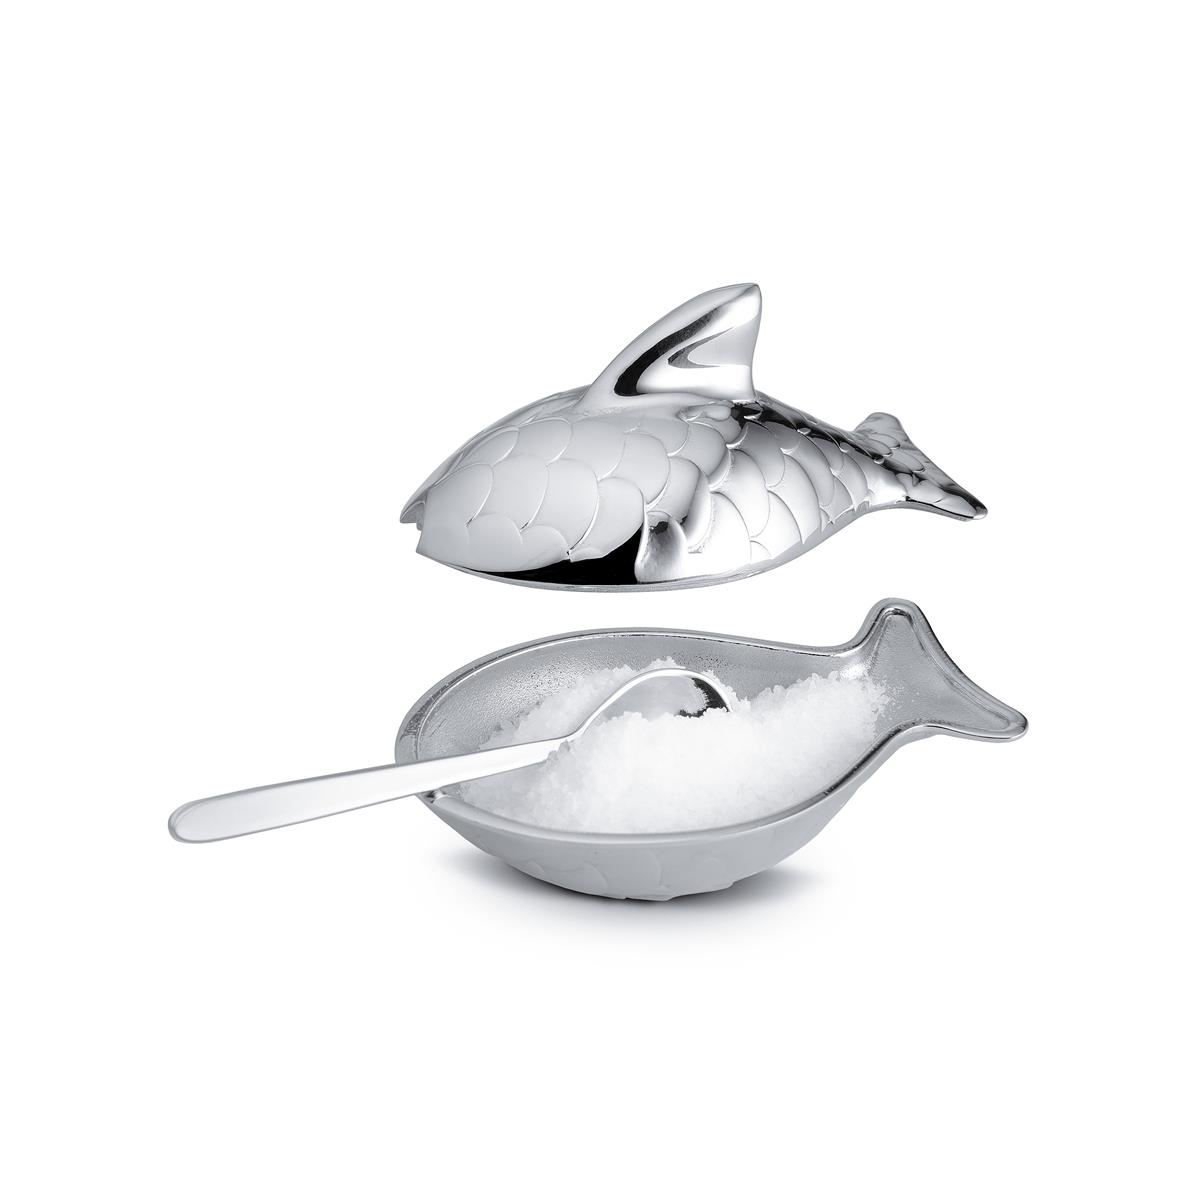 Alessi-Cha Sugar bowl in 18/10 stainless steel mirror polished